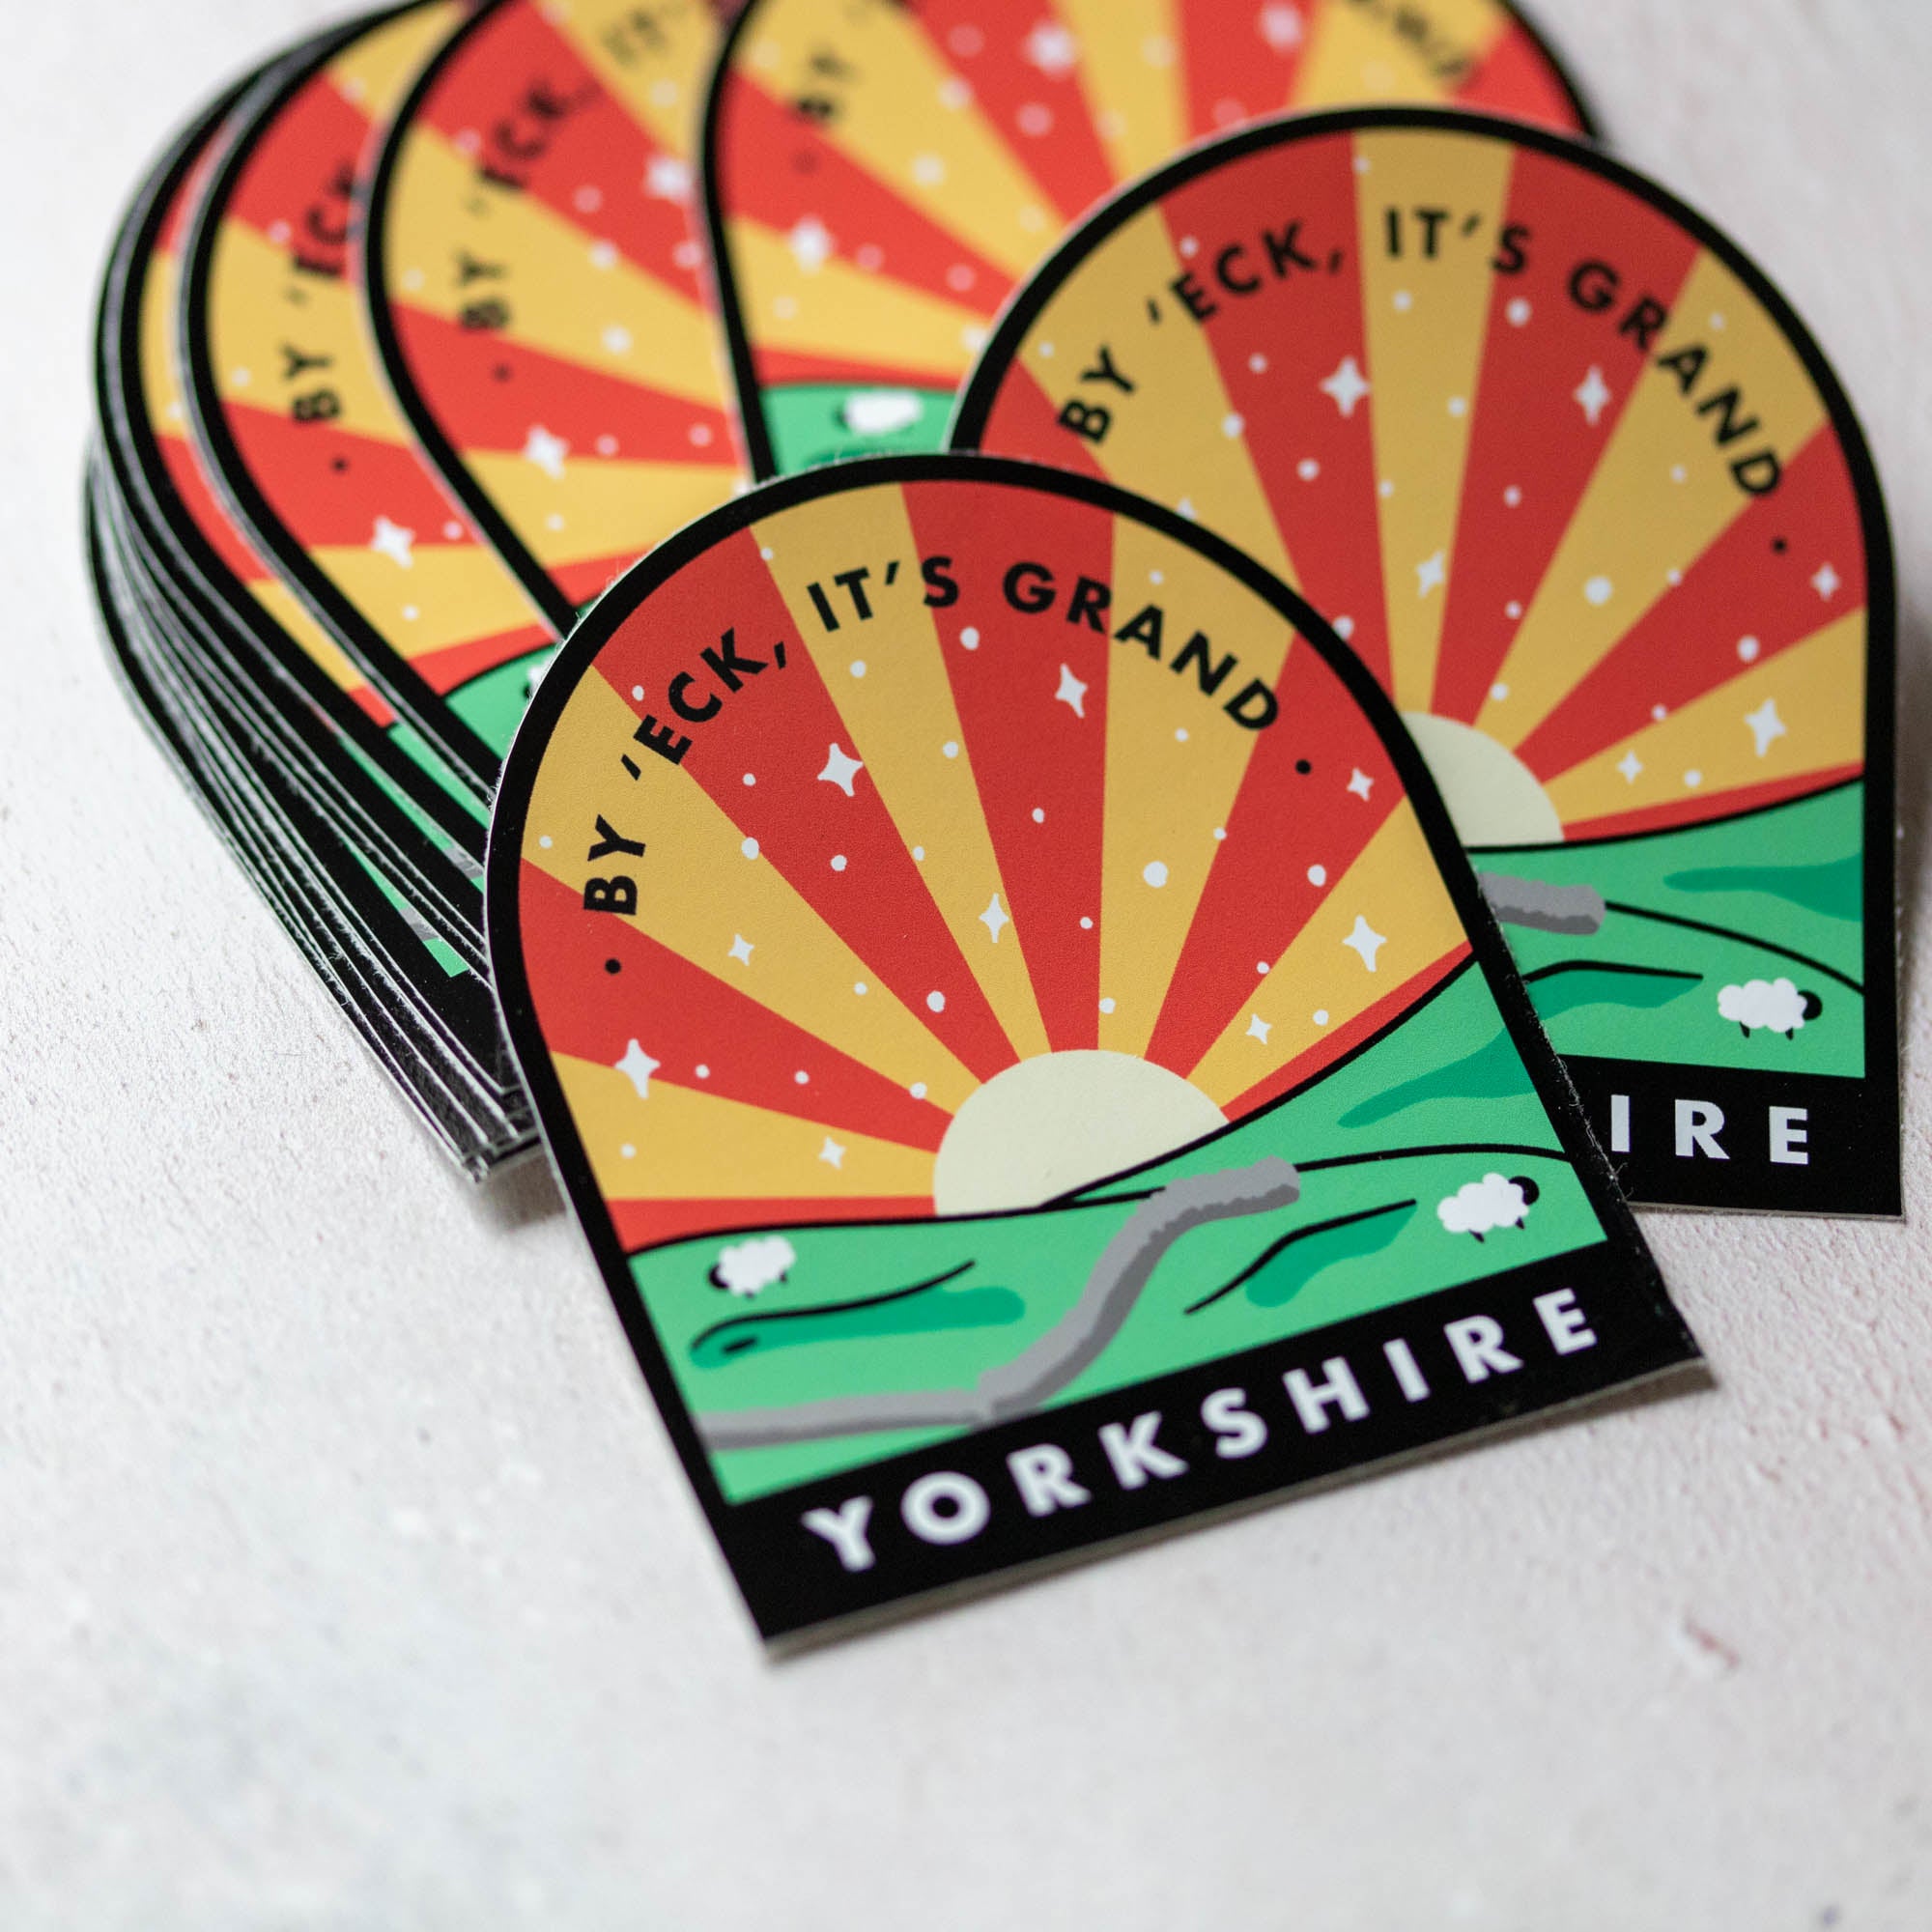 By 'Eck It's Grand, Yorkshire Large Vinyl Sticker - Finest Imaginary